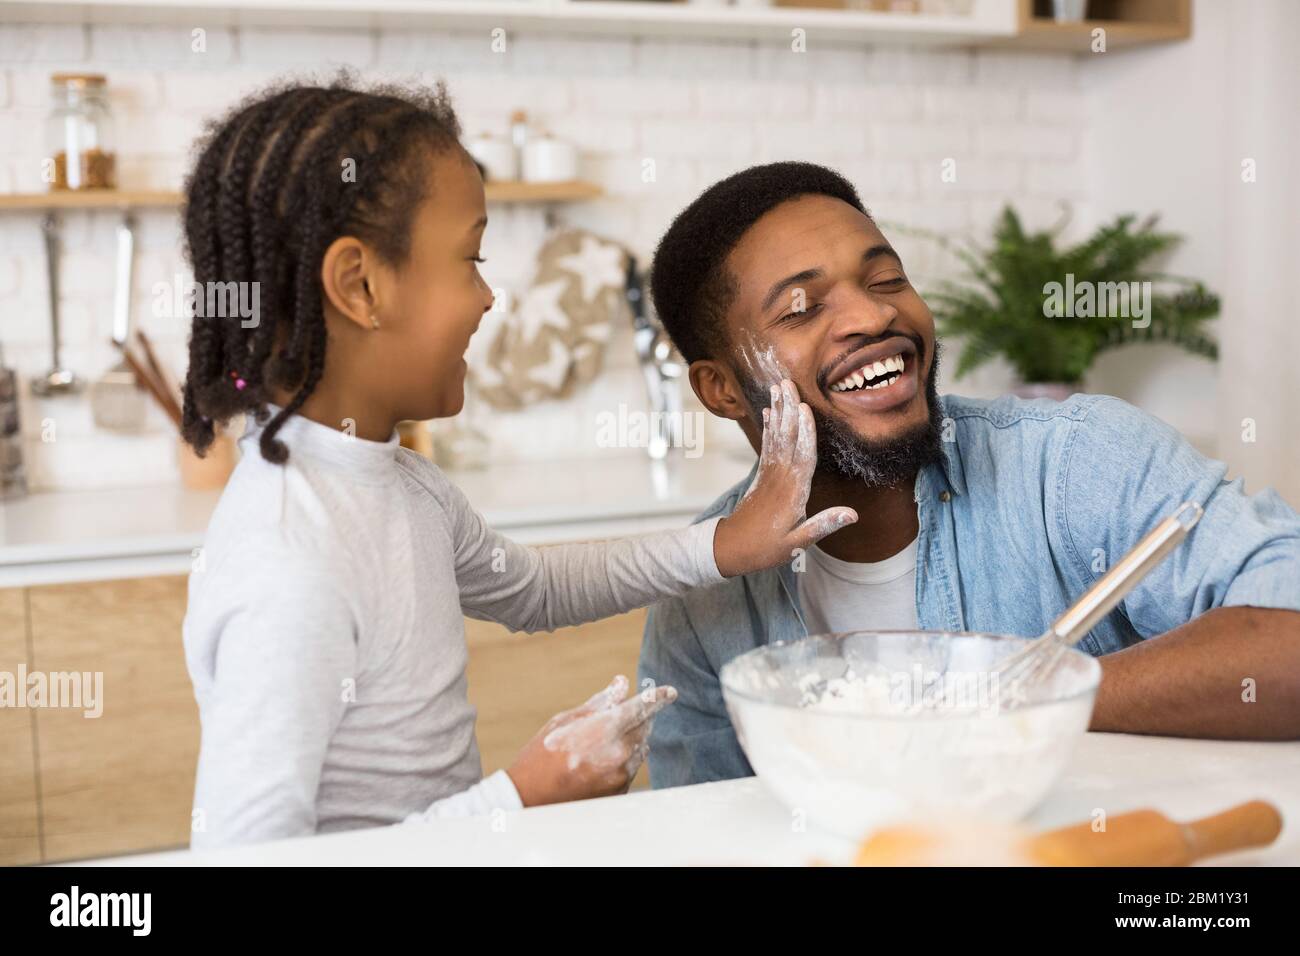 Cheerful father and daughter having fun while cooking Stock Photo